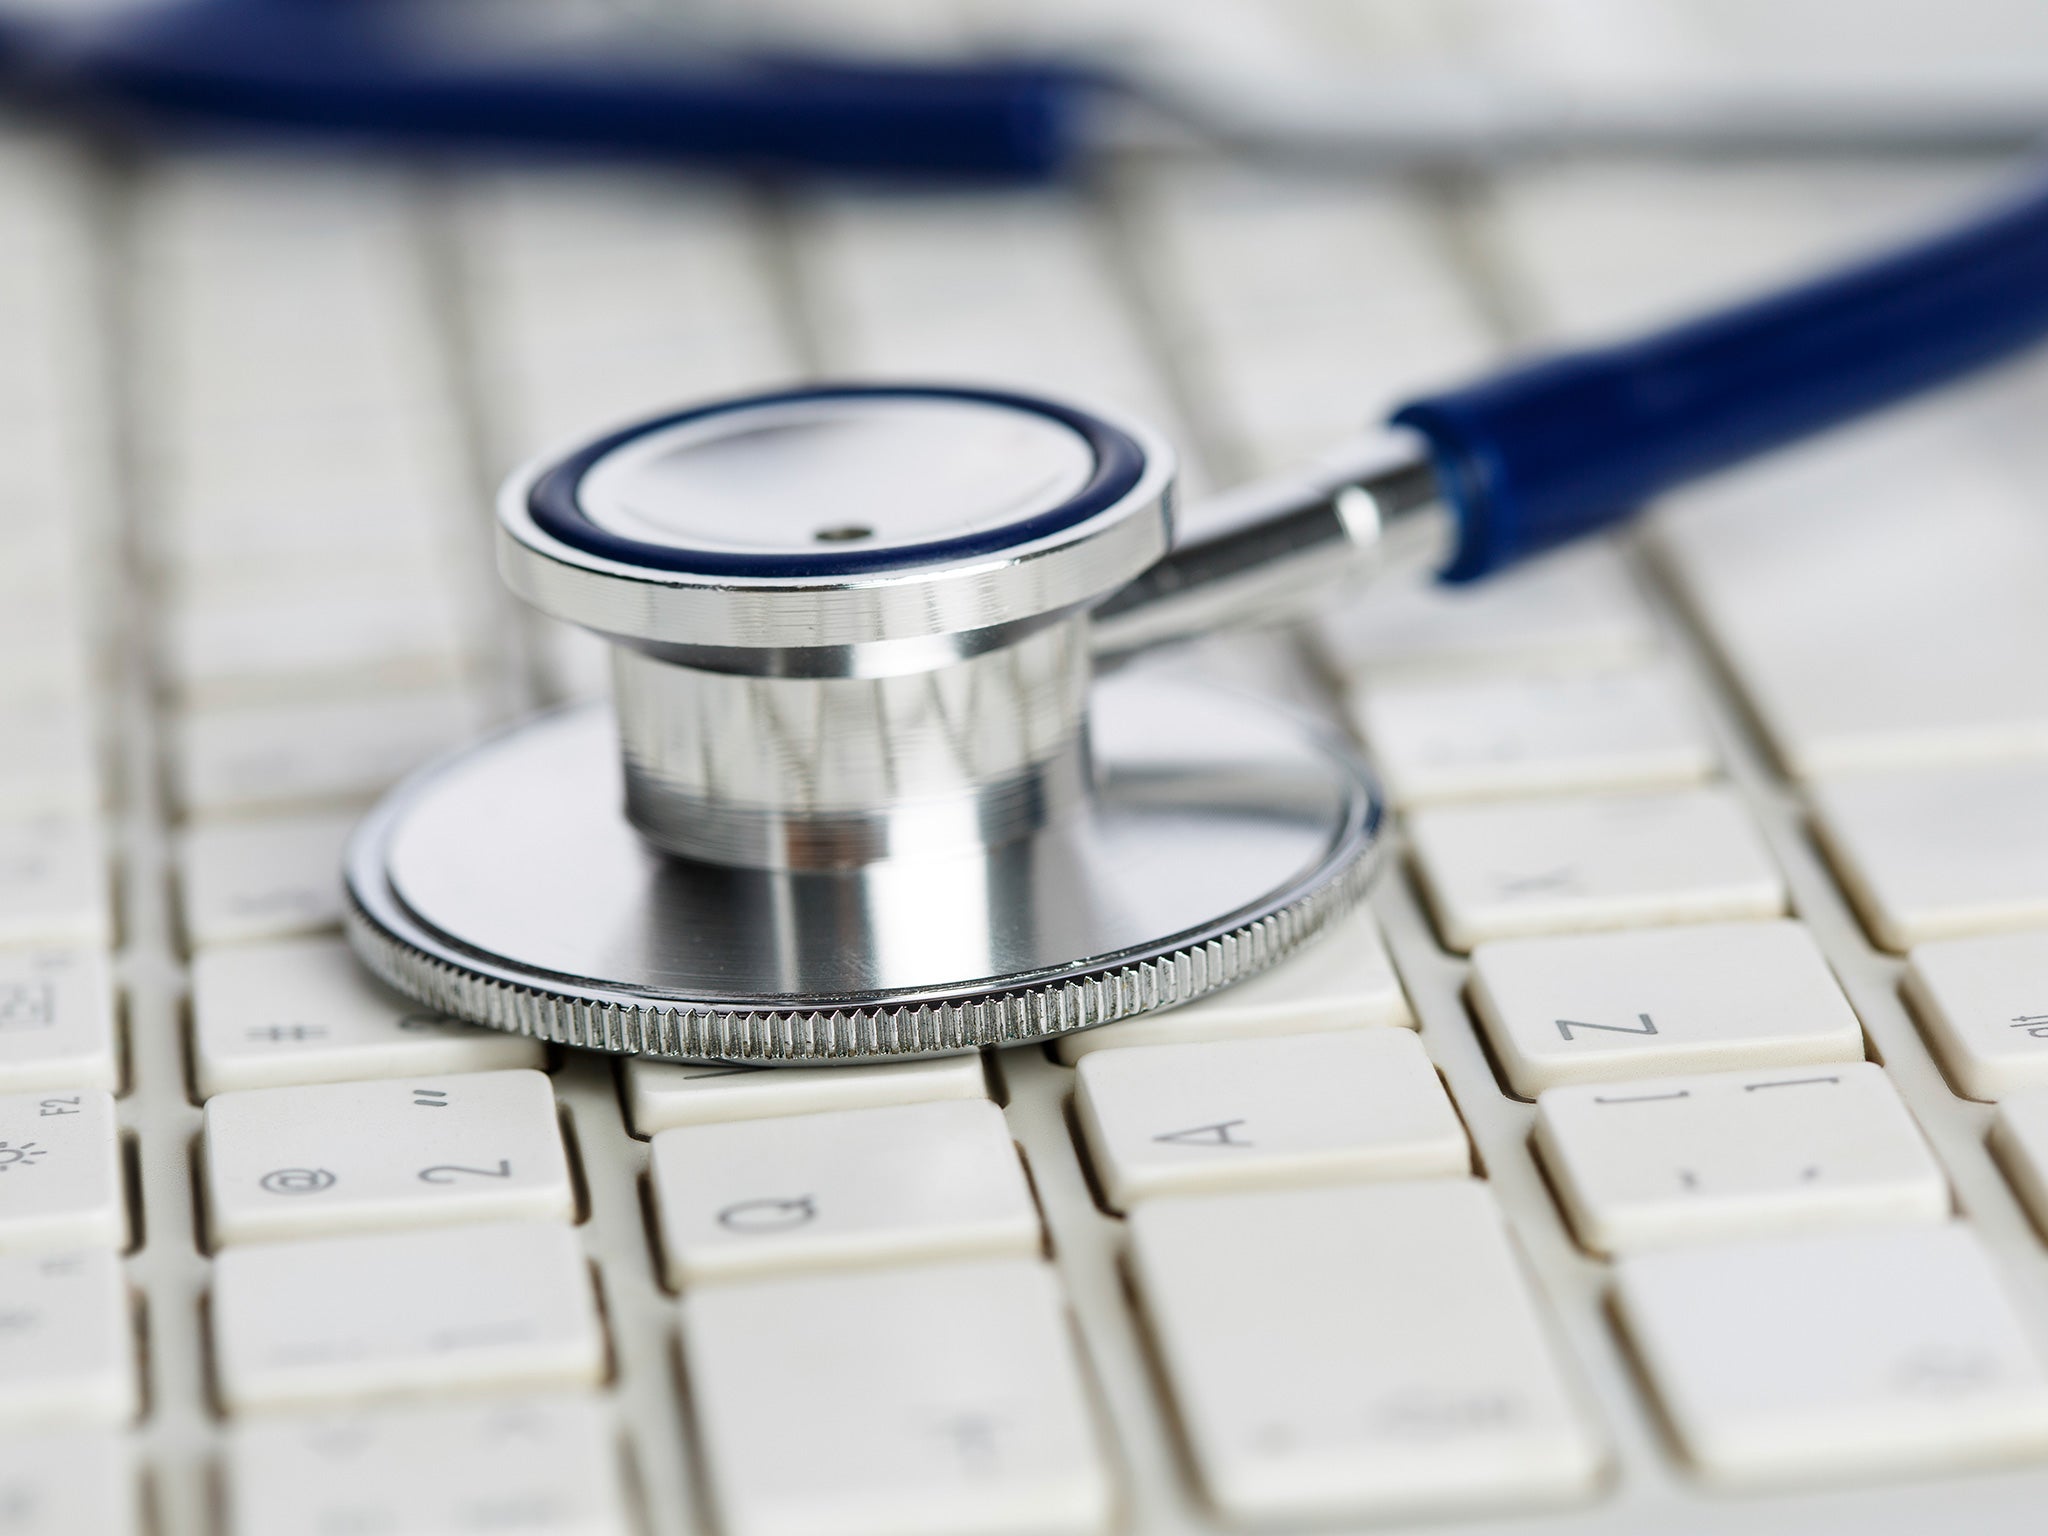 The report calls for 'online self-management' among patients